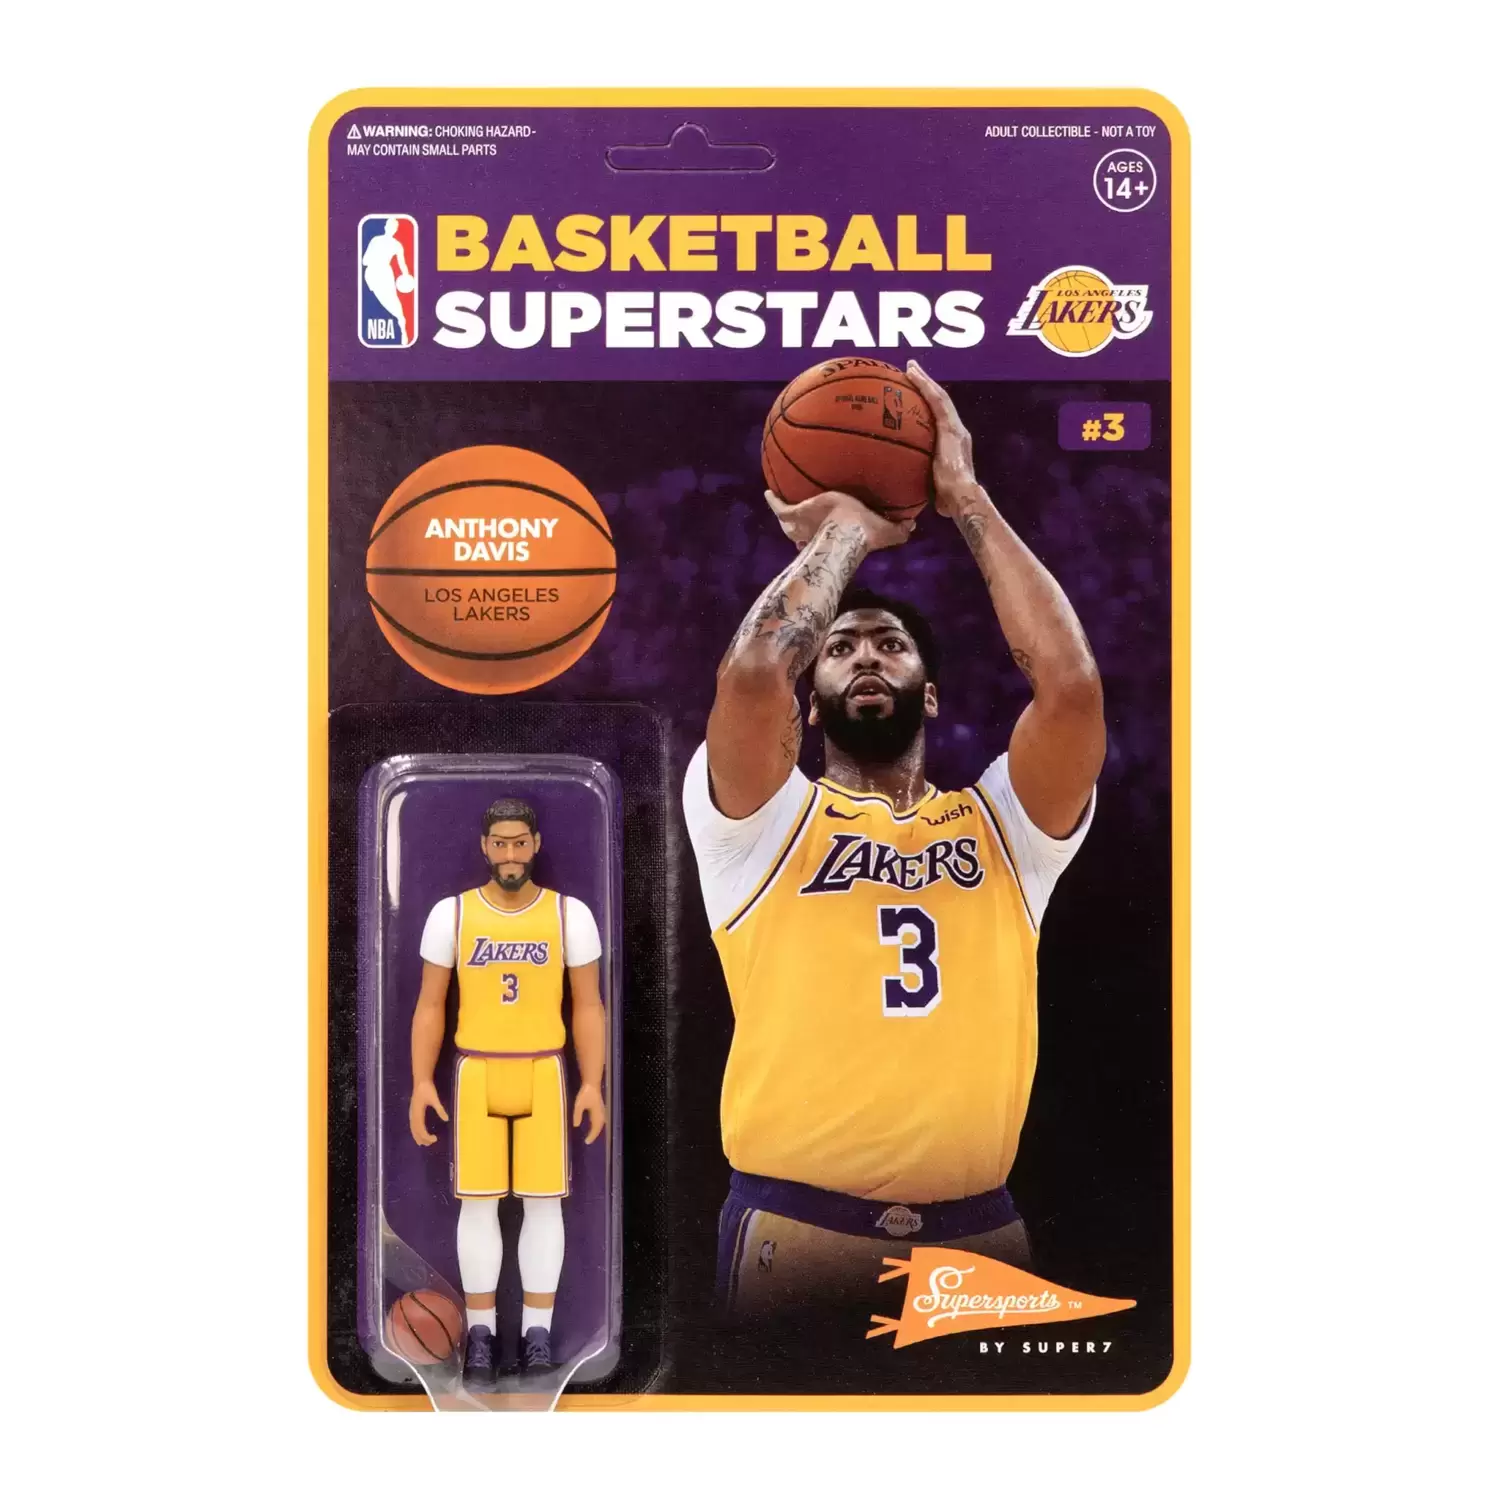 Supersports by Super7 - Supersports Basketball - Anthony Davis (Lakers)